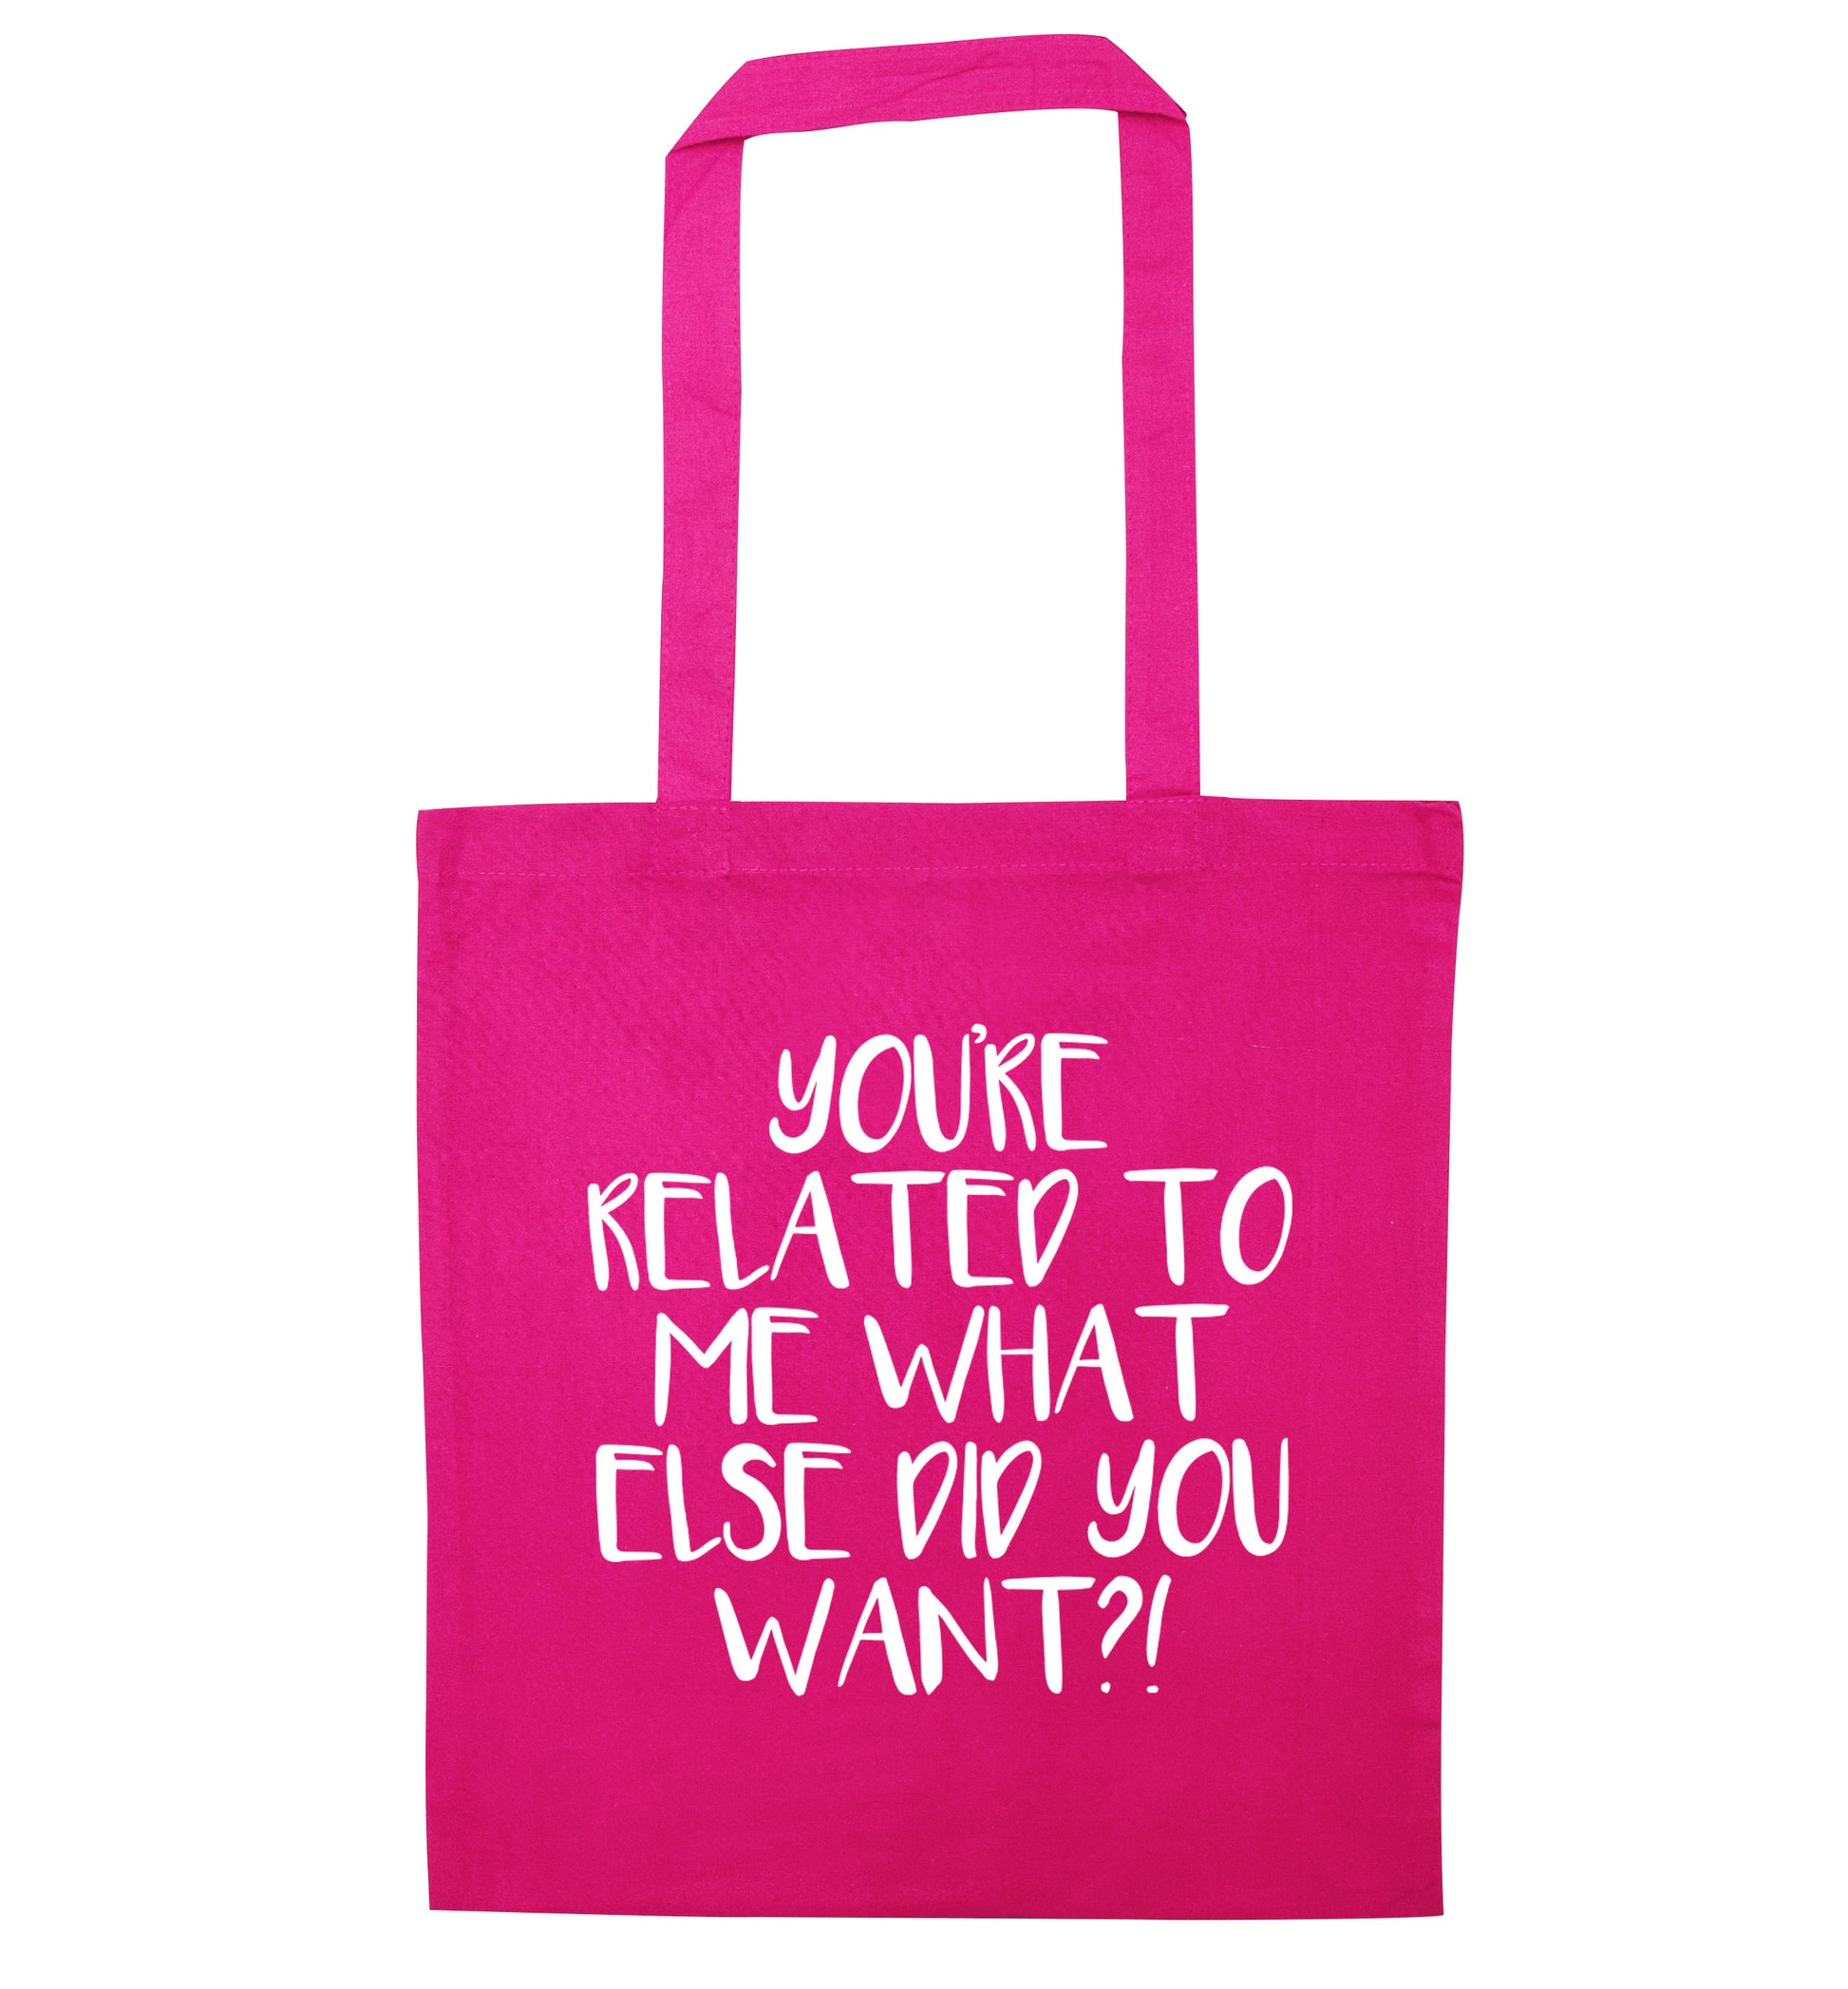 You're related to me what more do you want? pink tote bag